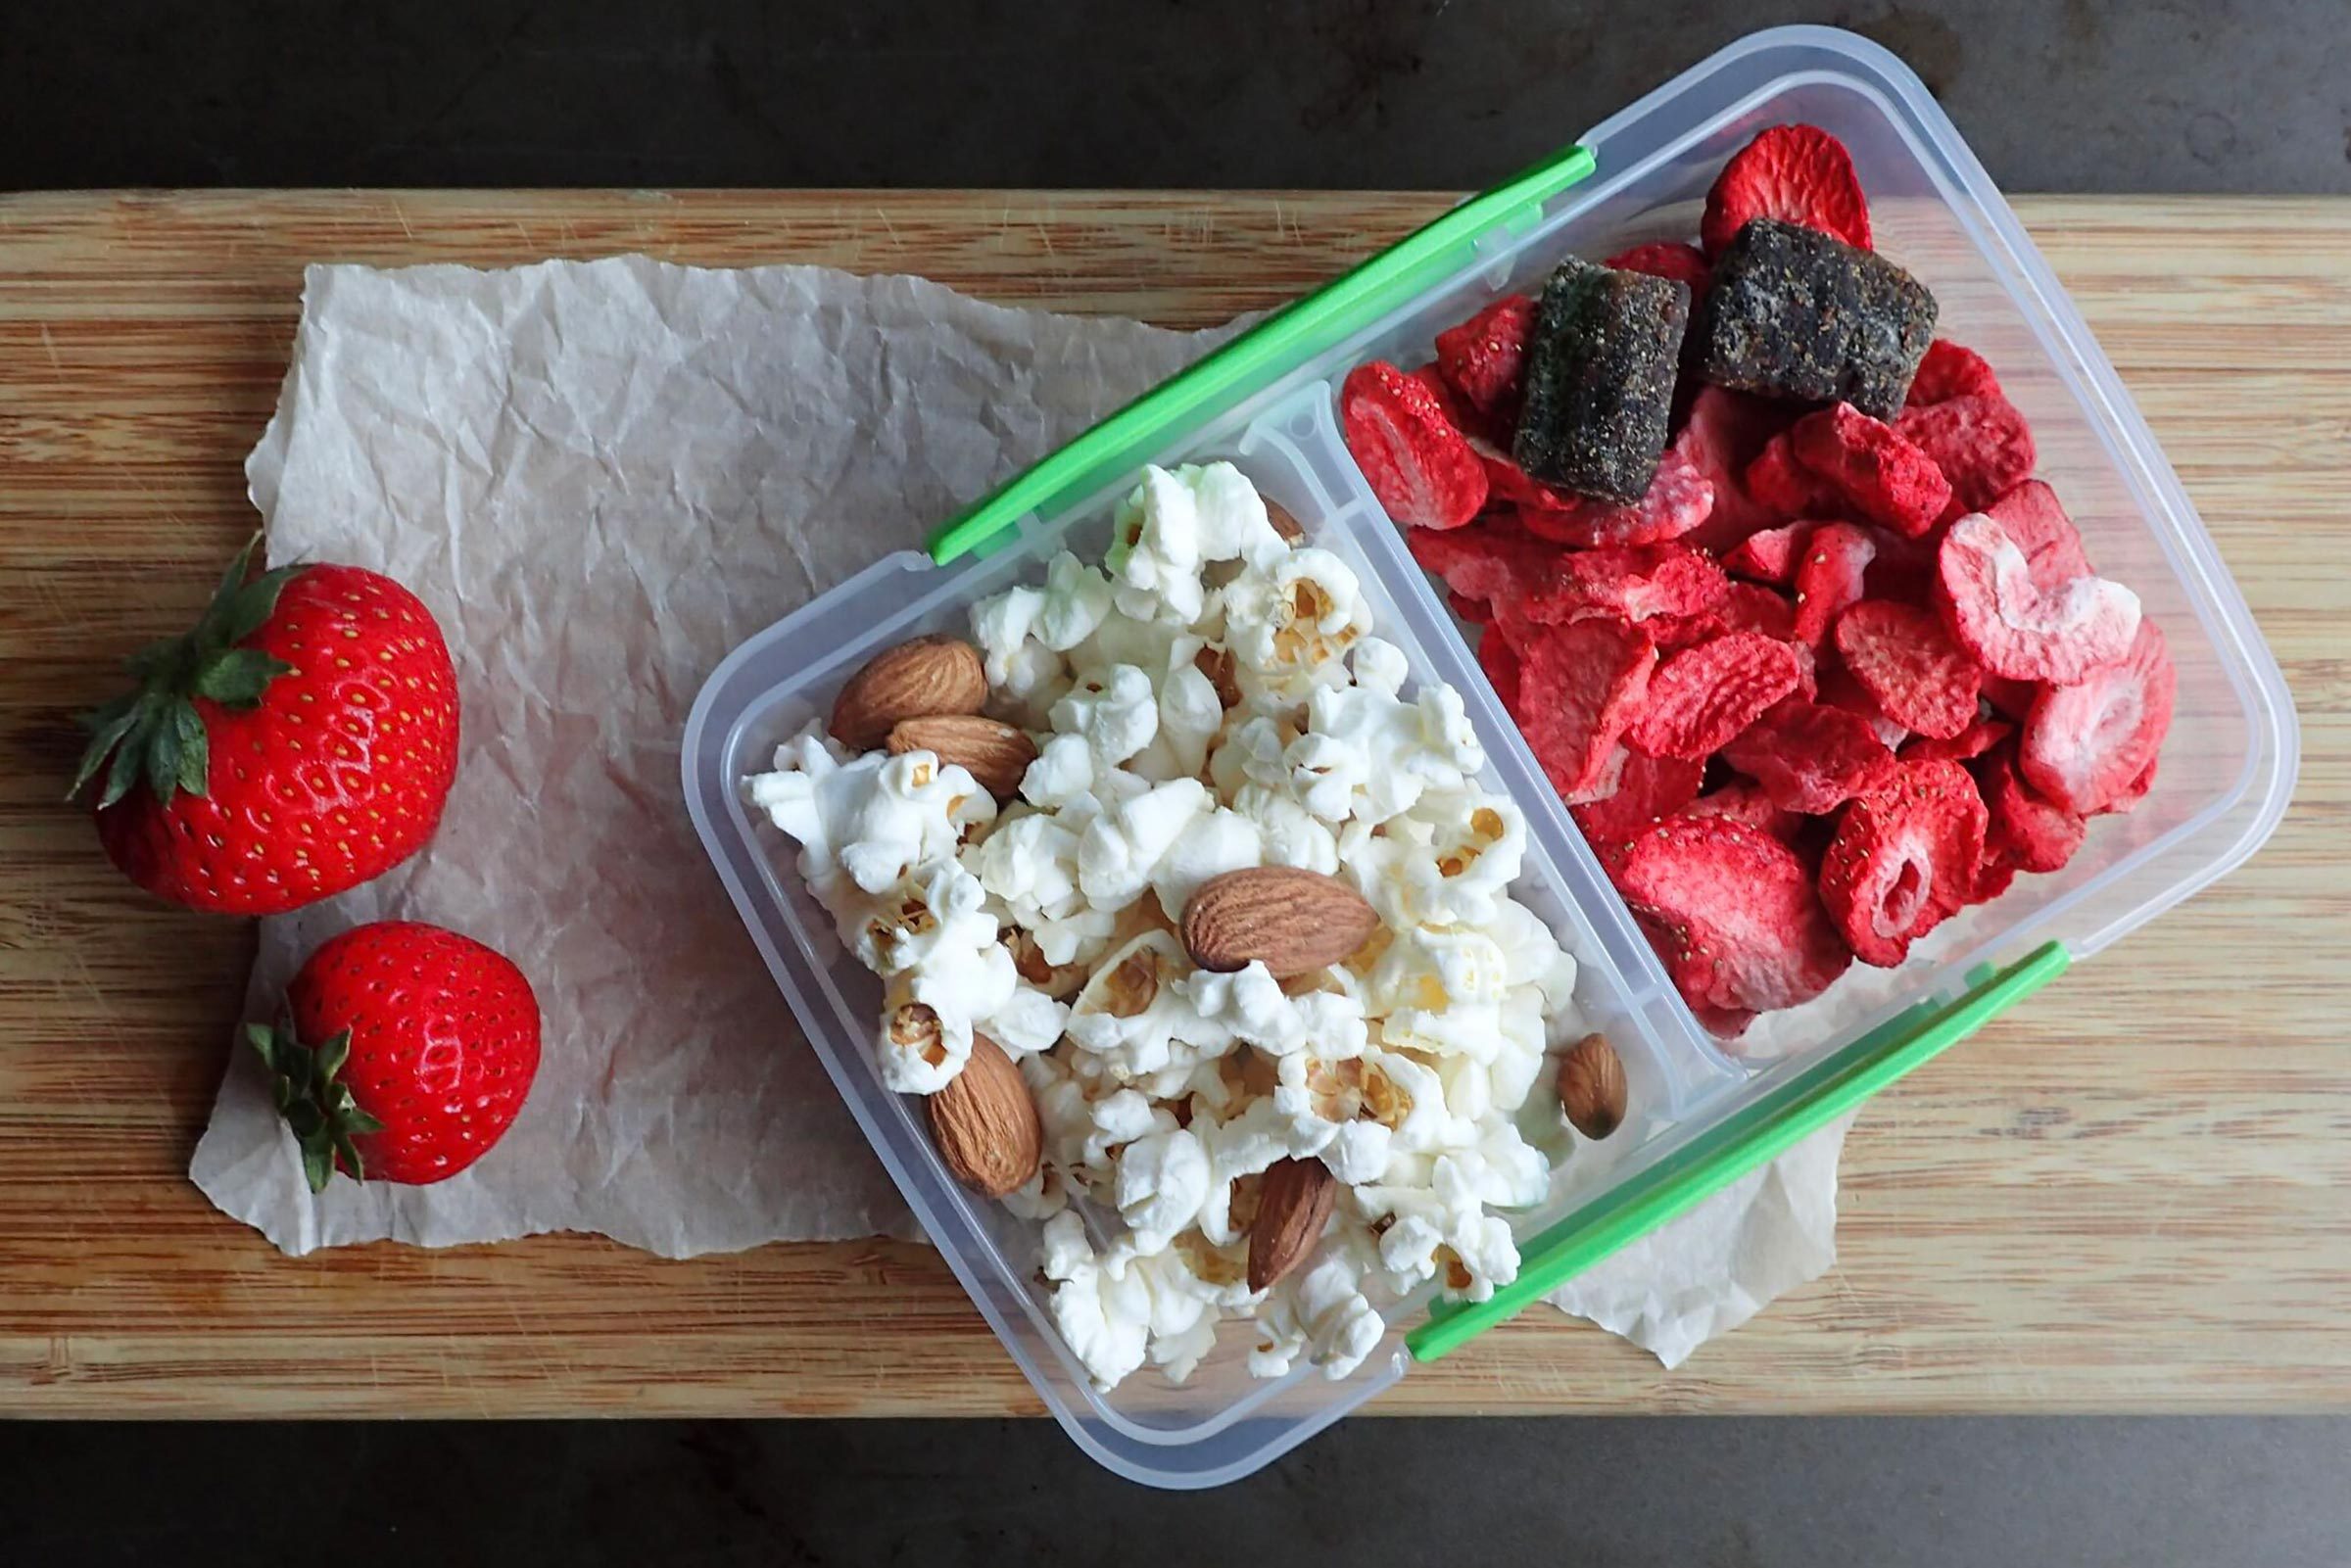 Simple Lunchbox Ideas - With Easy Trail Mix Recipe